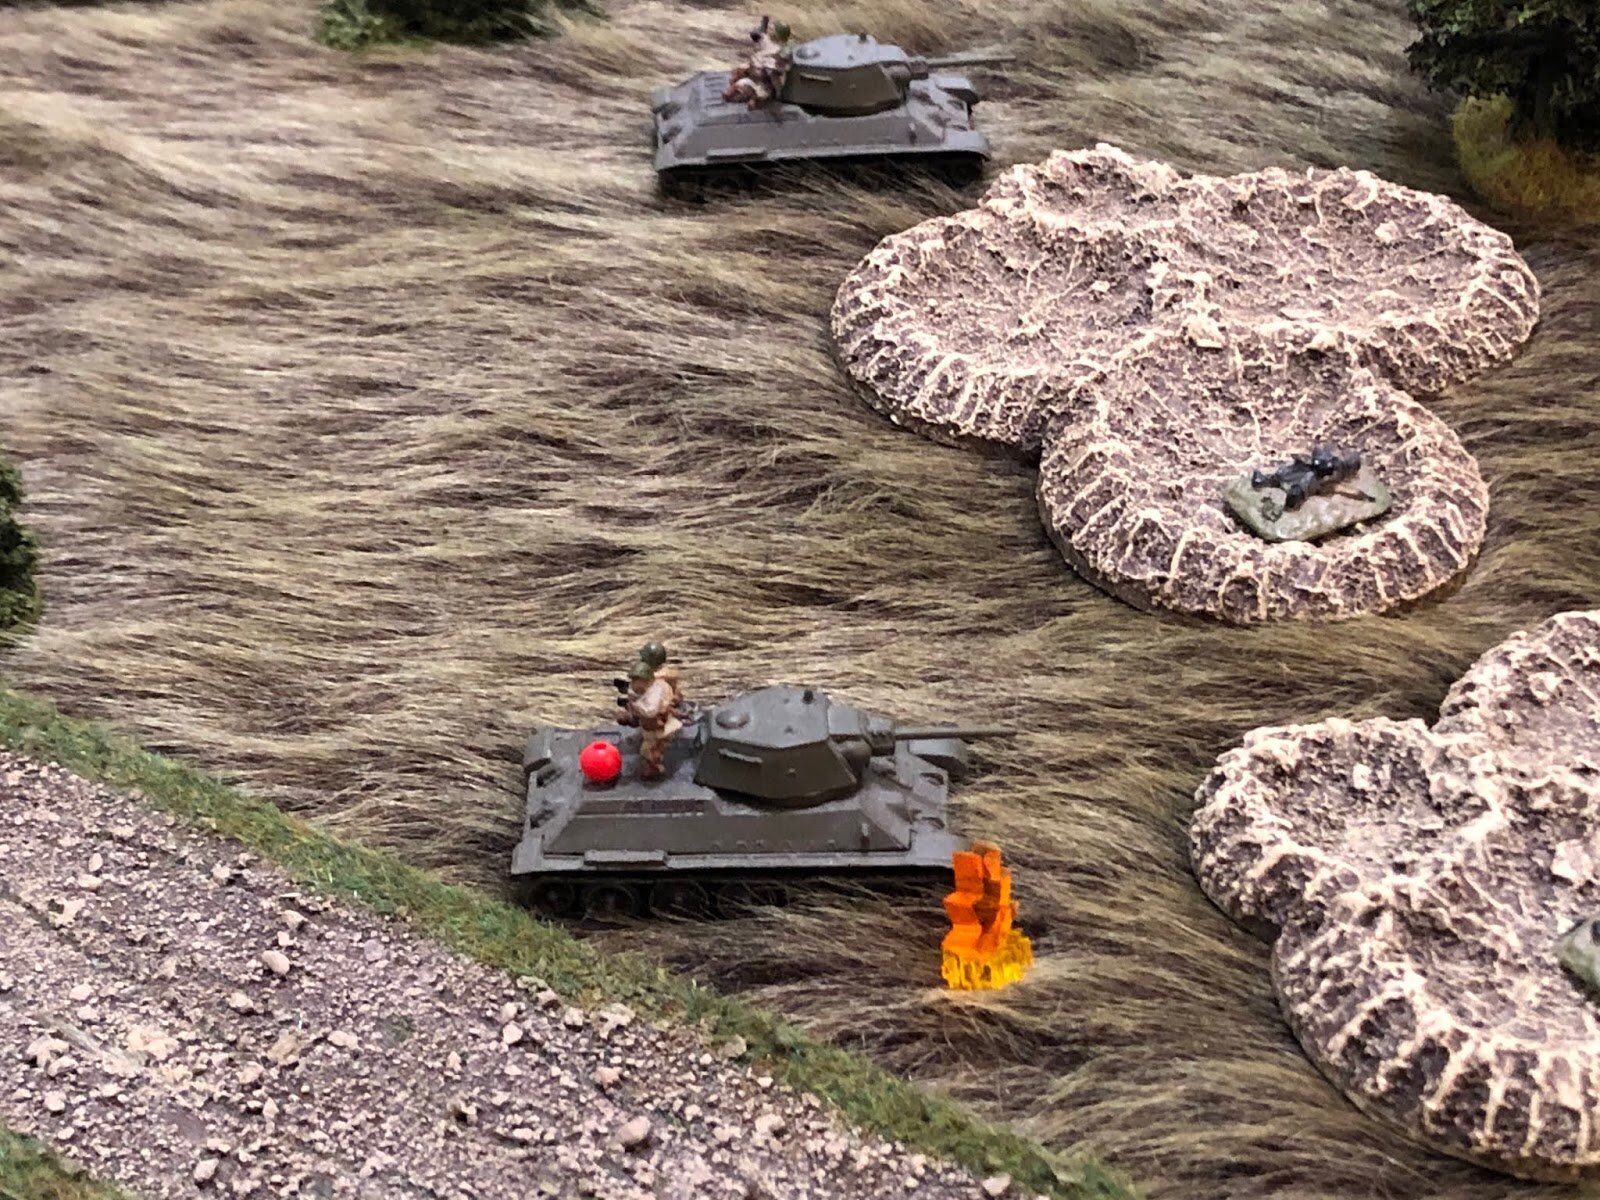  And they manage to suppress one of the squads. Not sure what they're going to do about those tanks, though... 